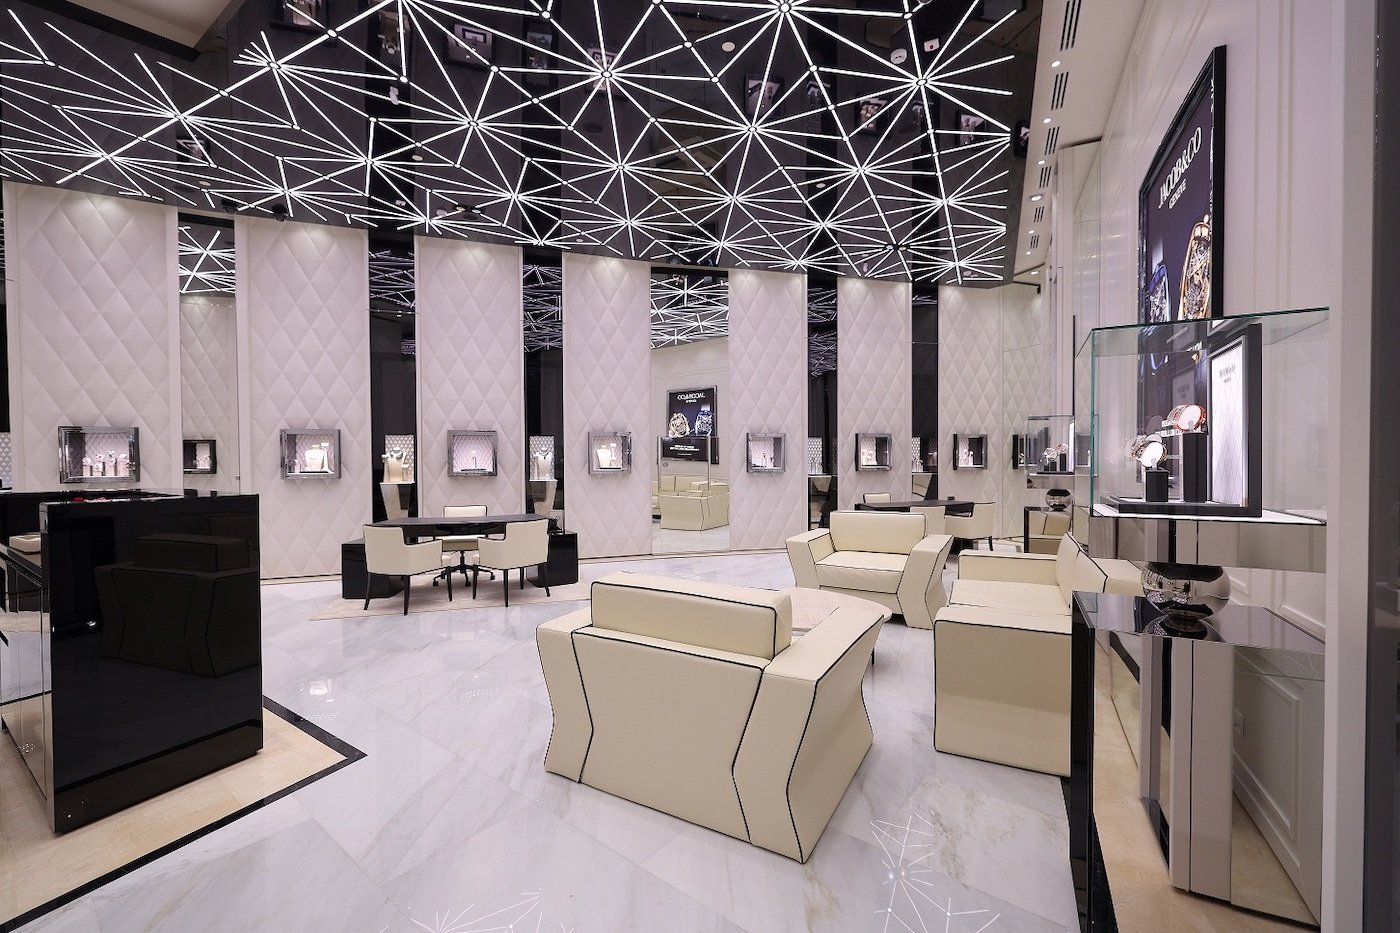 Jacob & Co opens its largest store worldwide in Riyadh